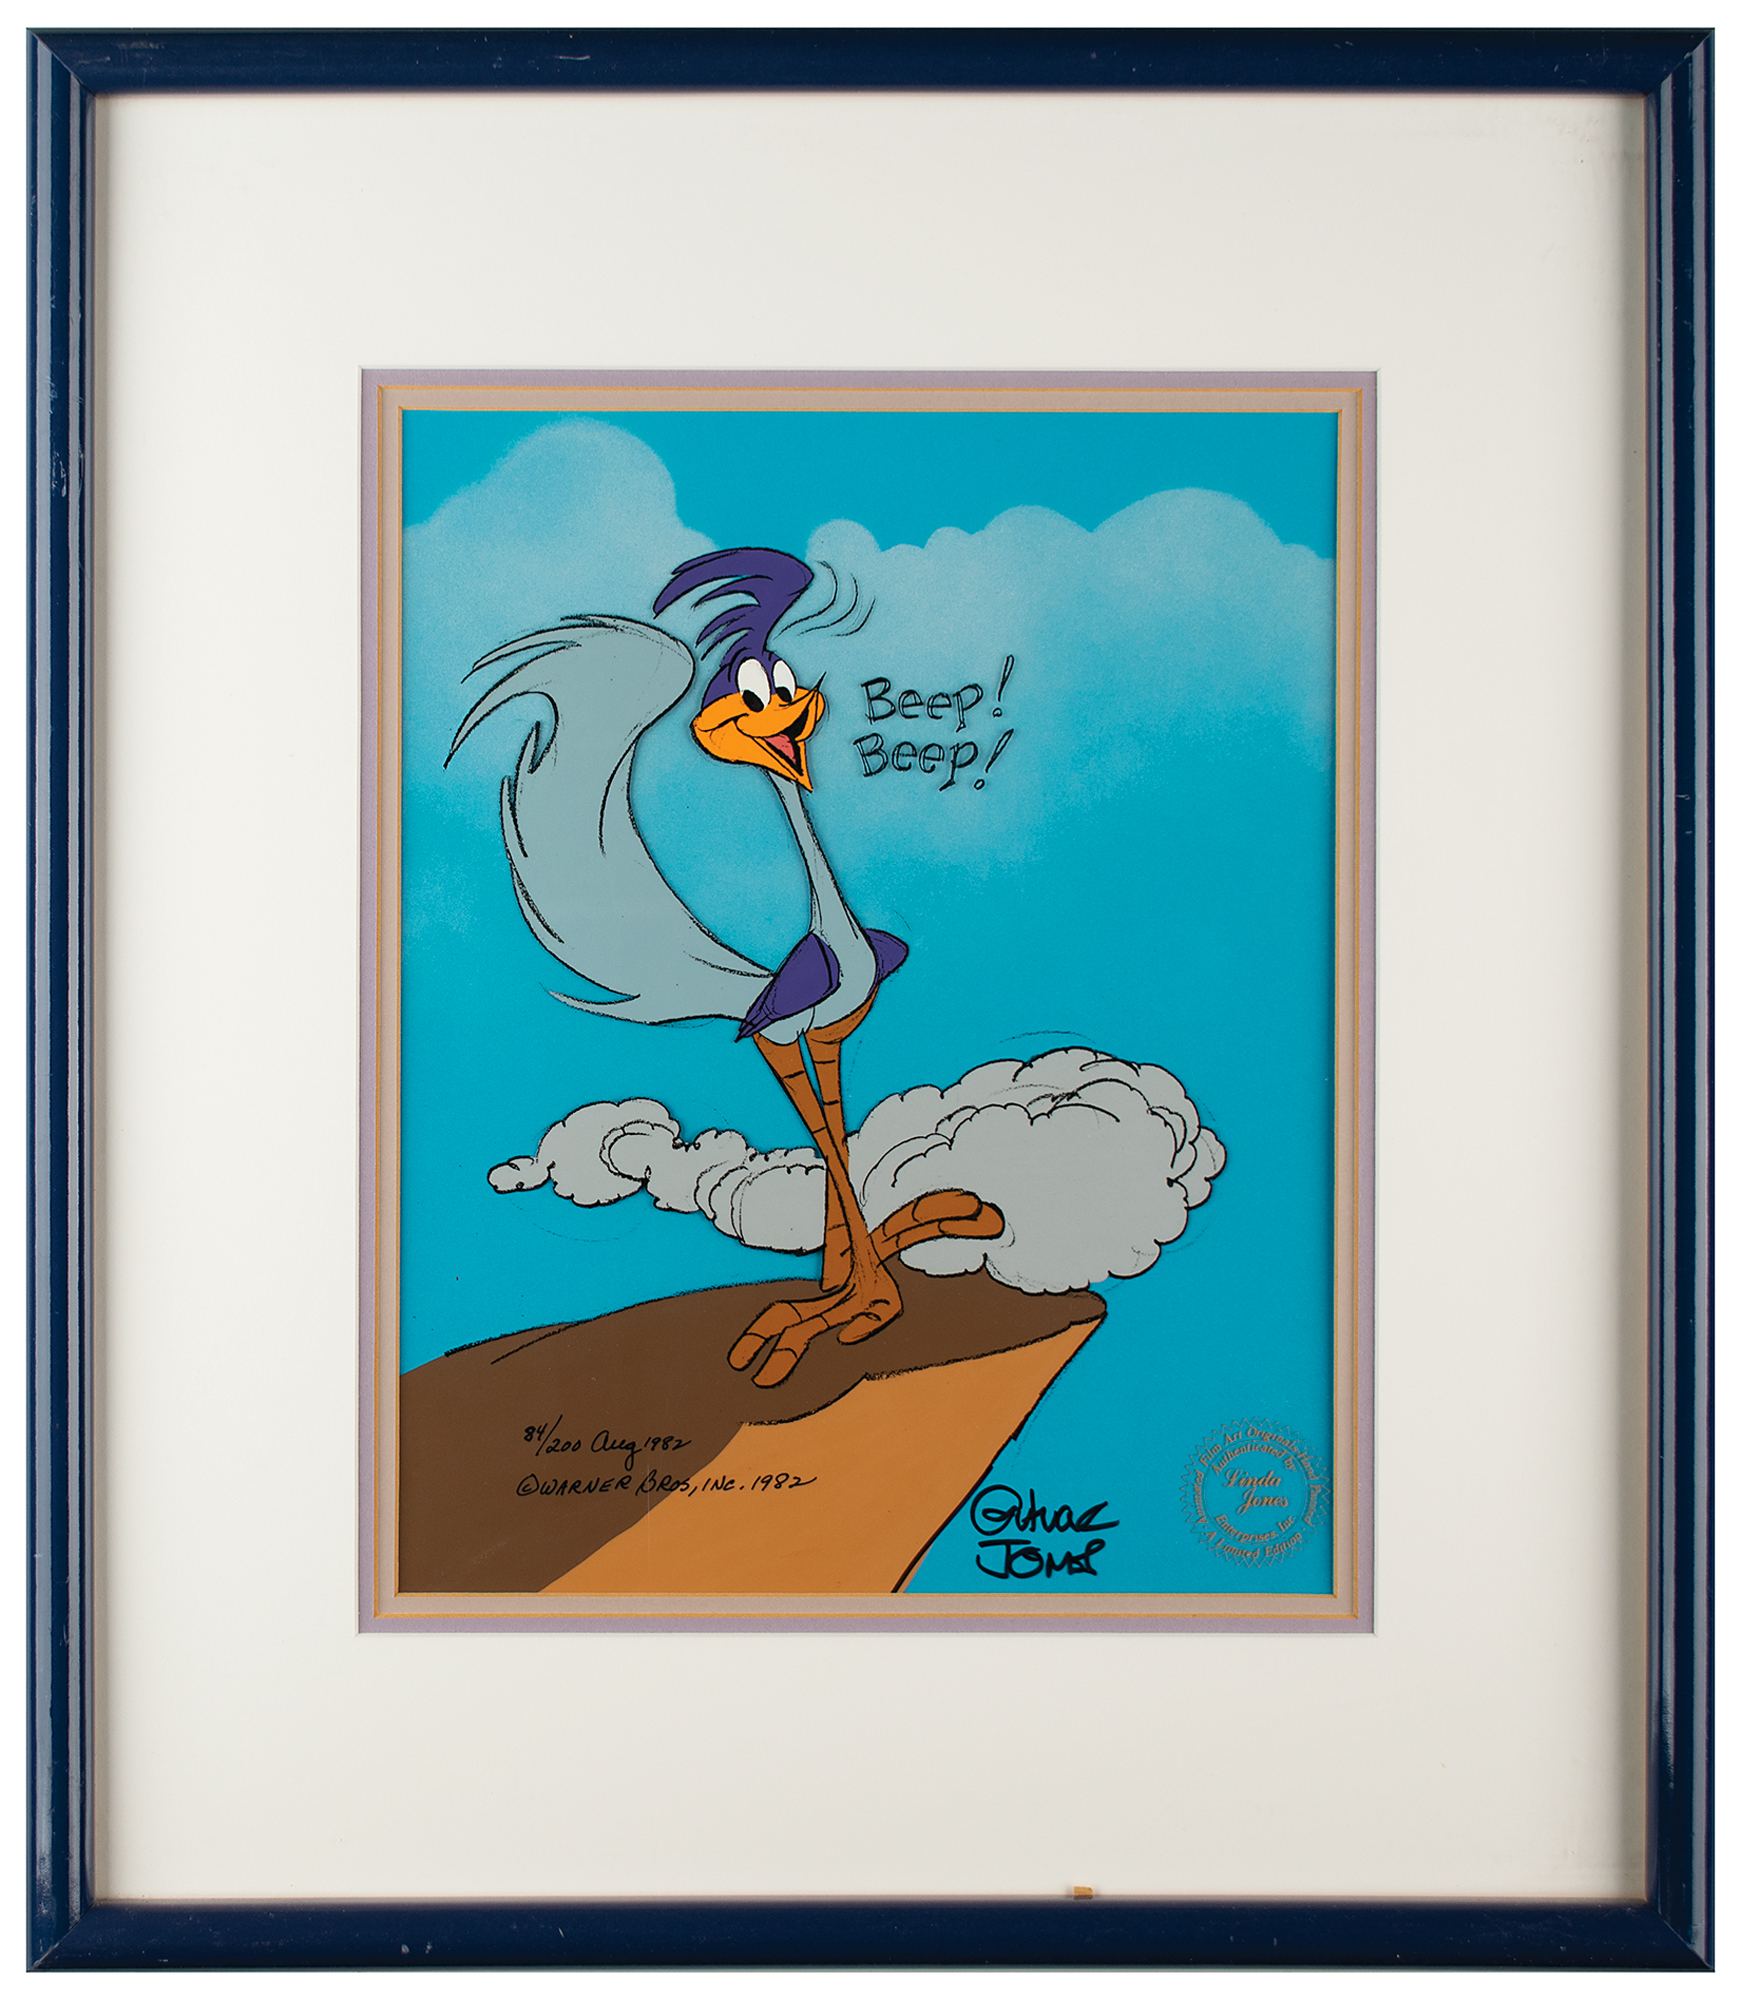 Chuck Jones Signed Limited Edition Cel: 'Road Runner' | Sold for $375 | RR  Auction